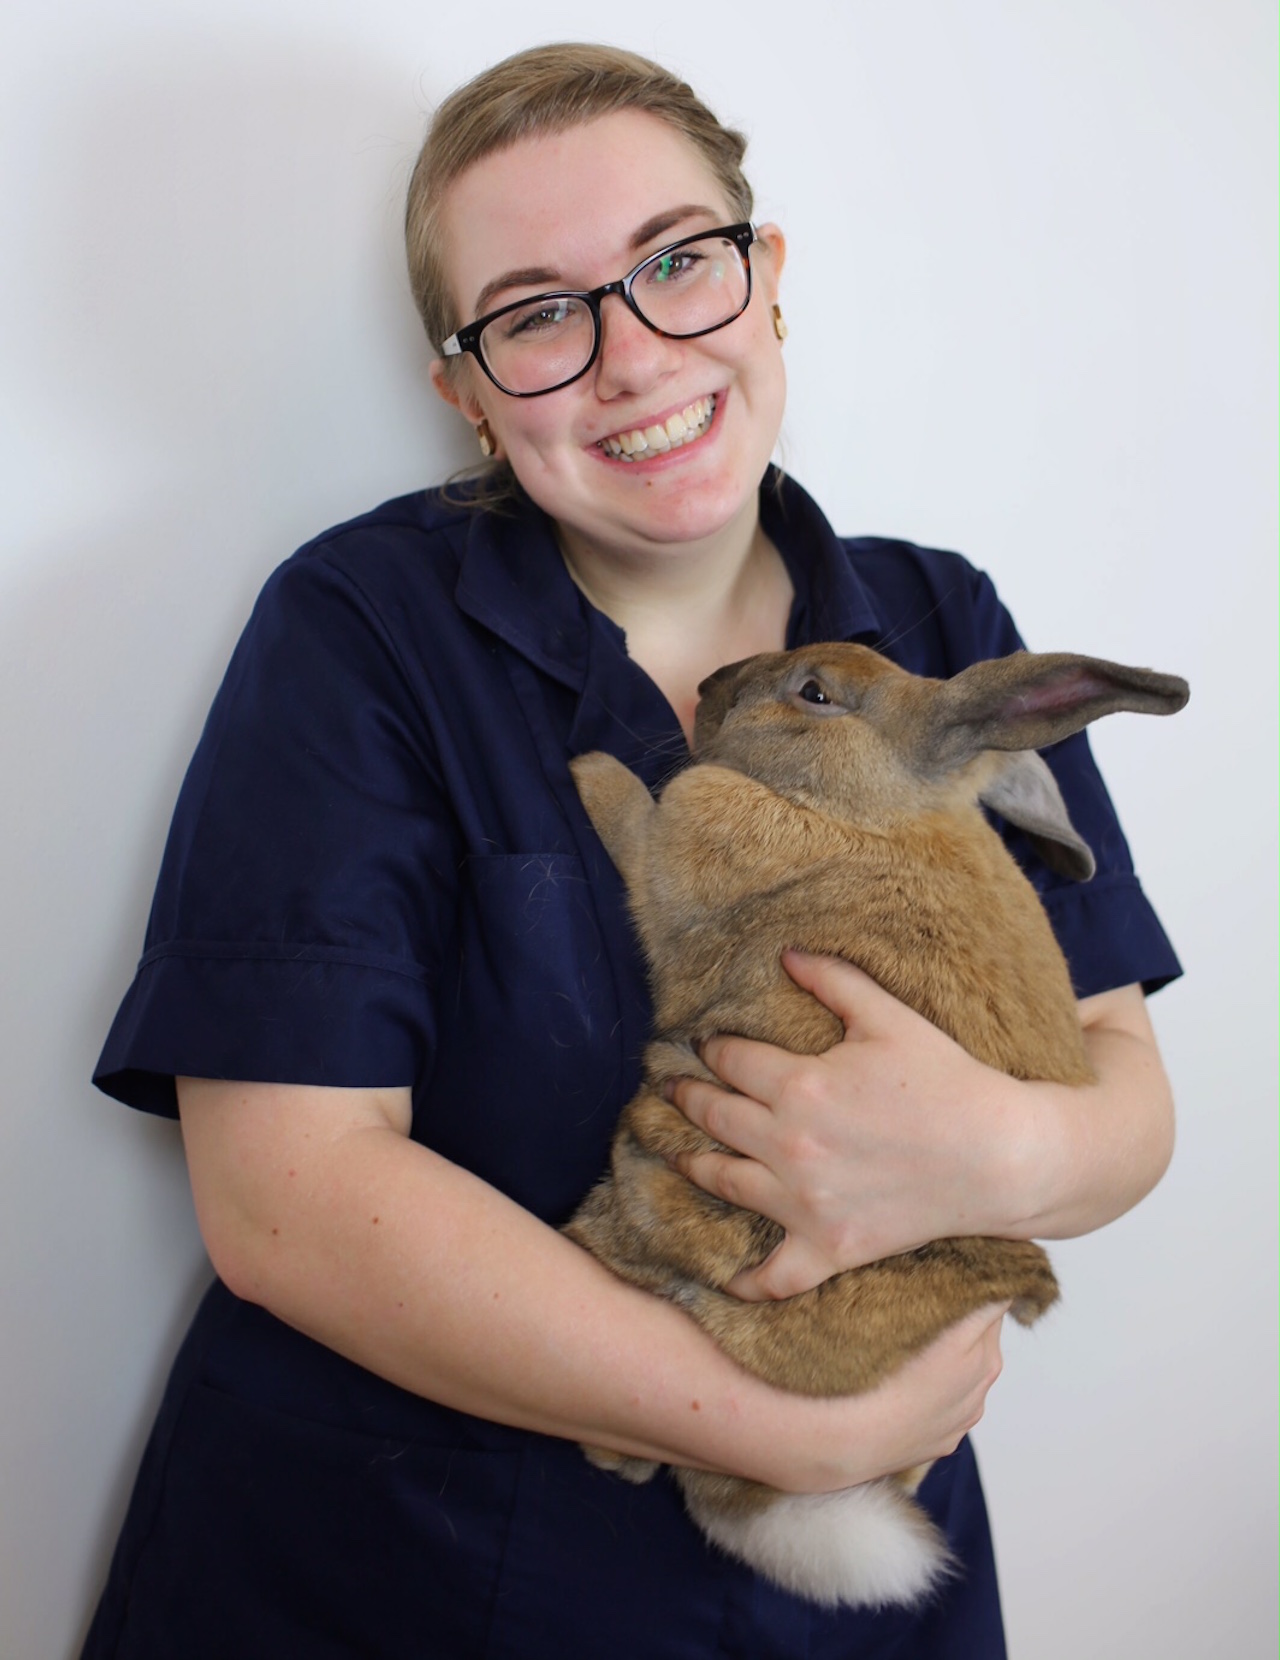 The writer holding a rabbit.